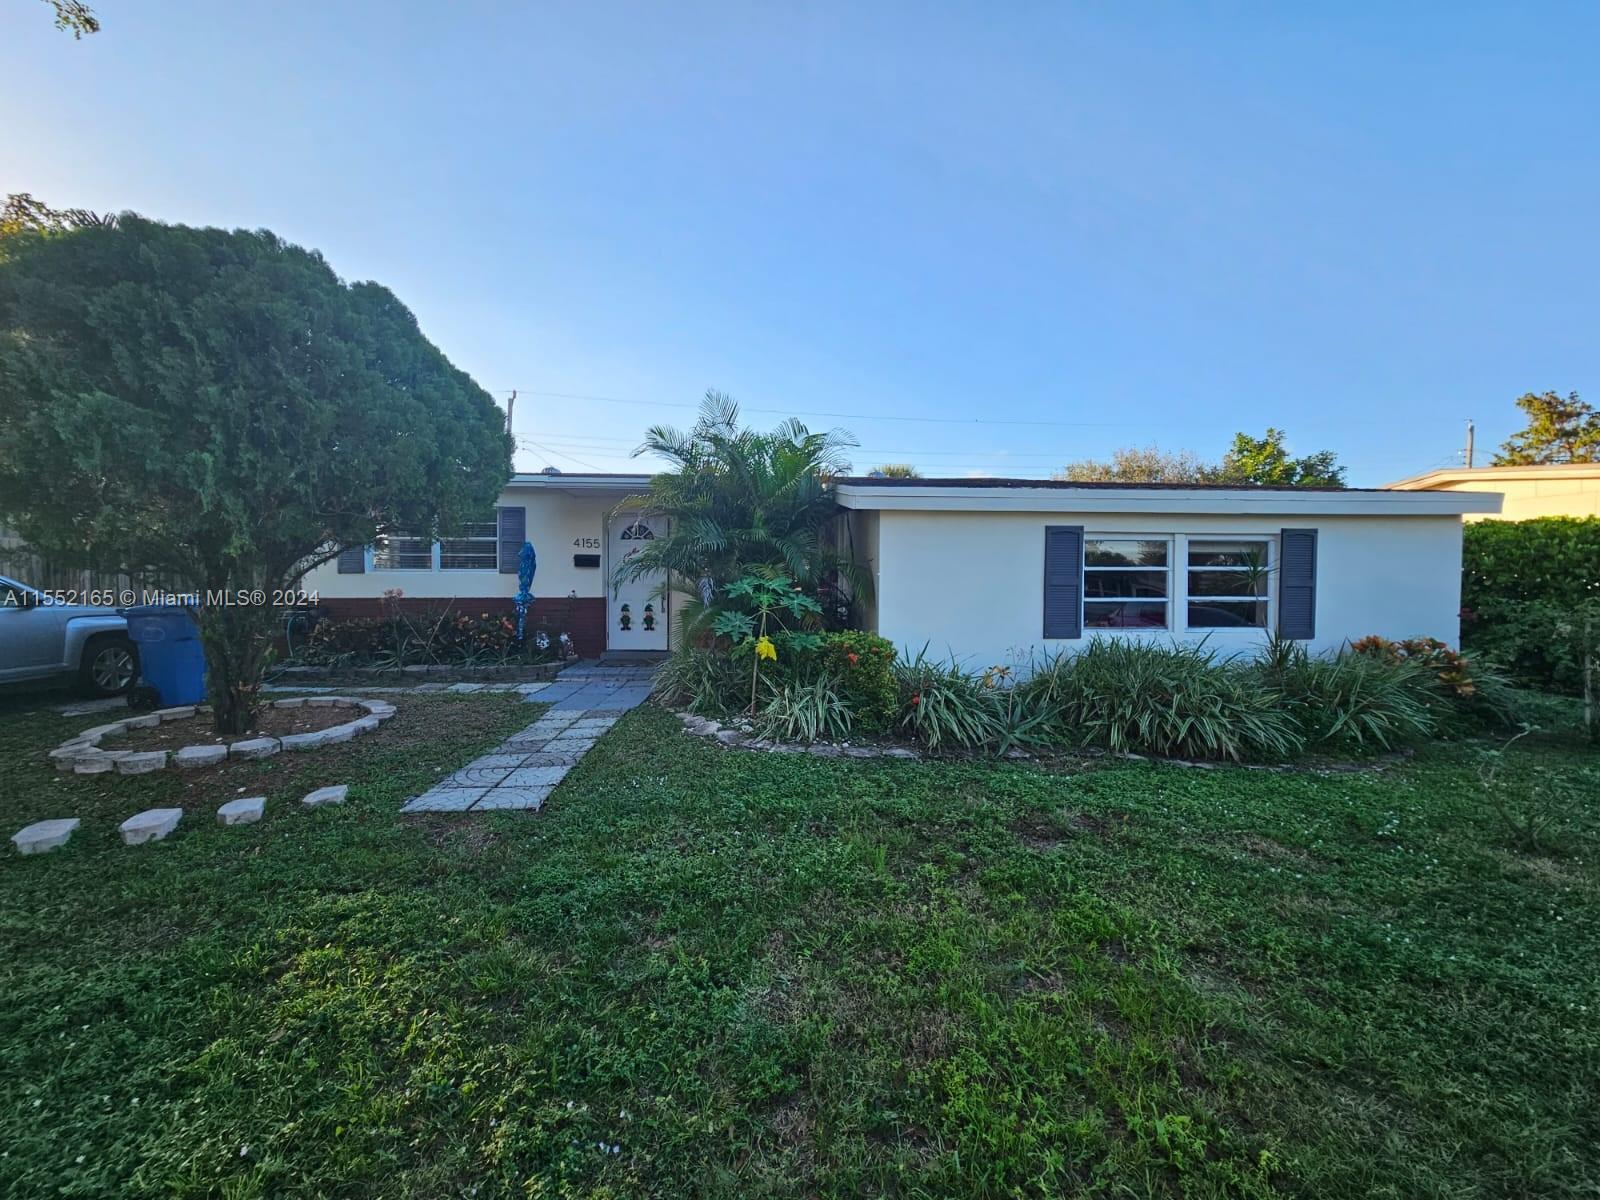 Photo of 4155 NW 12th Ter in Oakland Park, FL